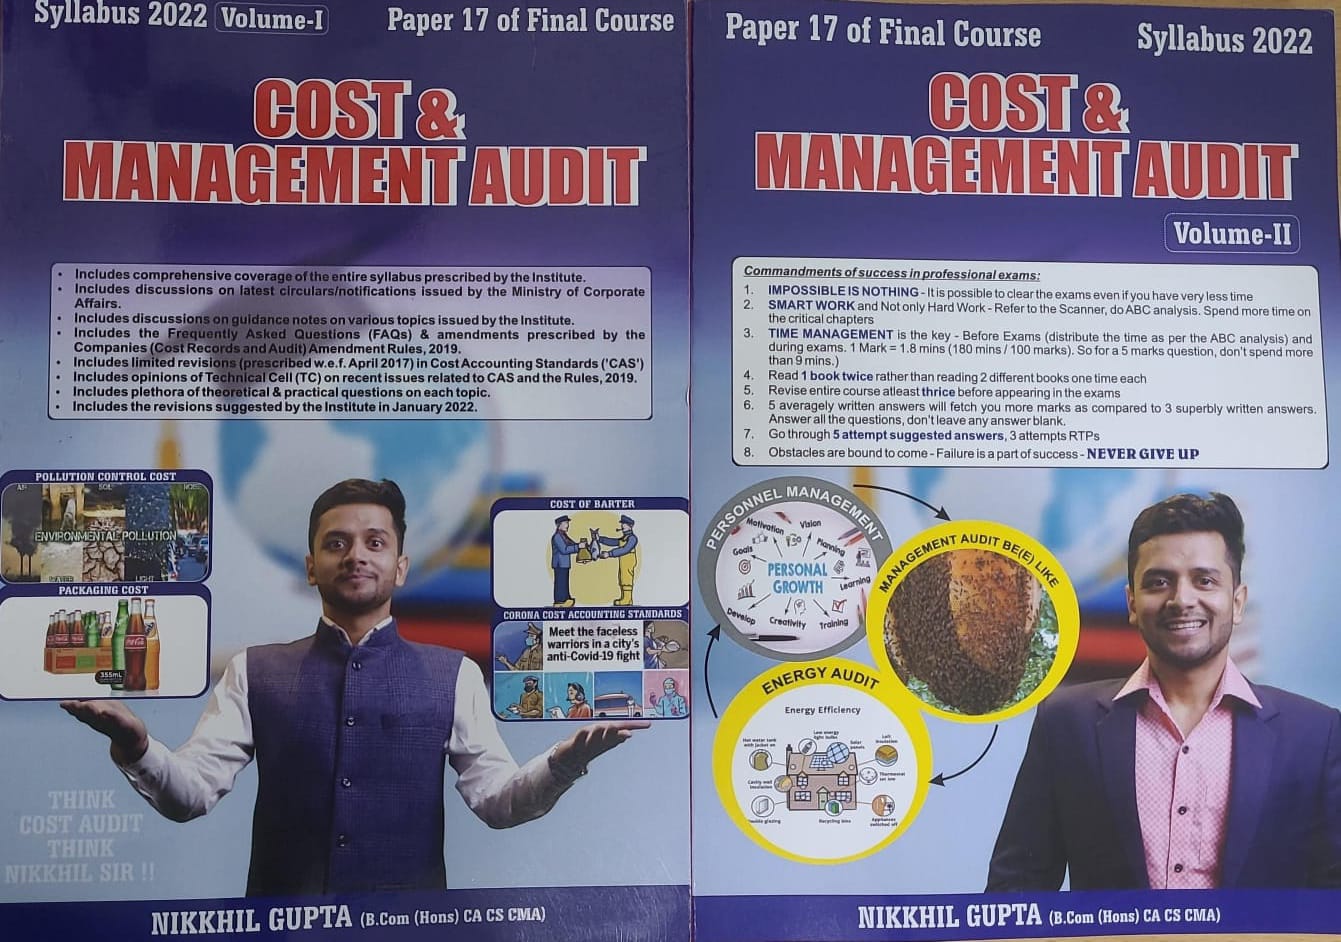 COST AND MANAGEMENT AUDIT - SYLLABUS 2022